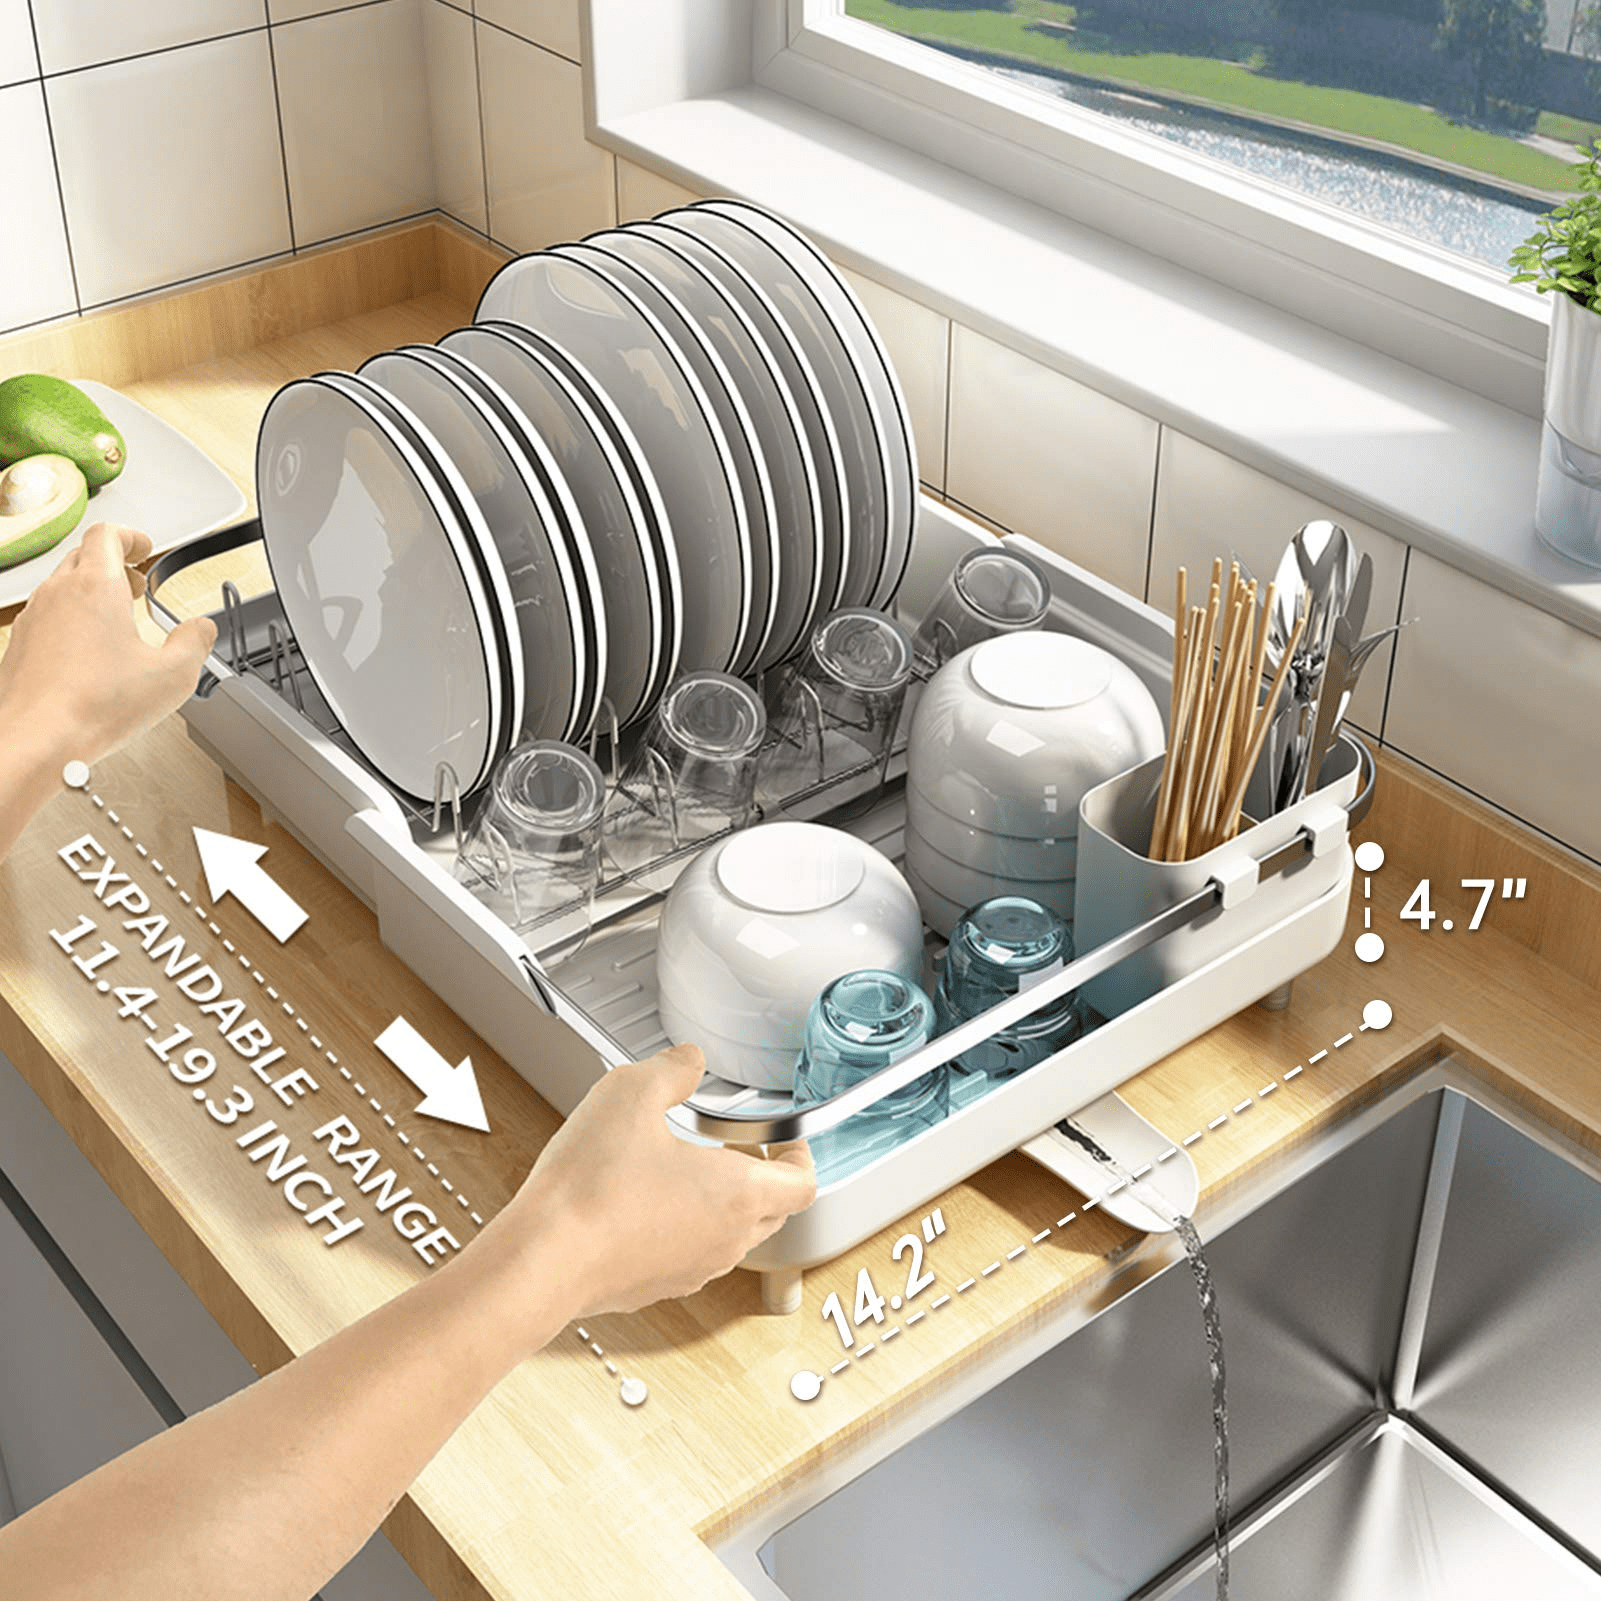 SAYZH Dish Drying Rack, Stainless Steel Dish Rack and Drainaboard Set, Expandable(115-193) Sink Dish Drainer with Cup Holder Utensil Holder for Kitchen